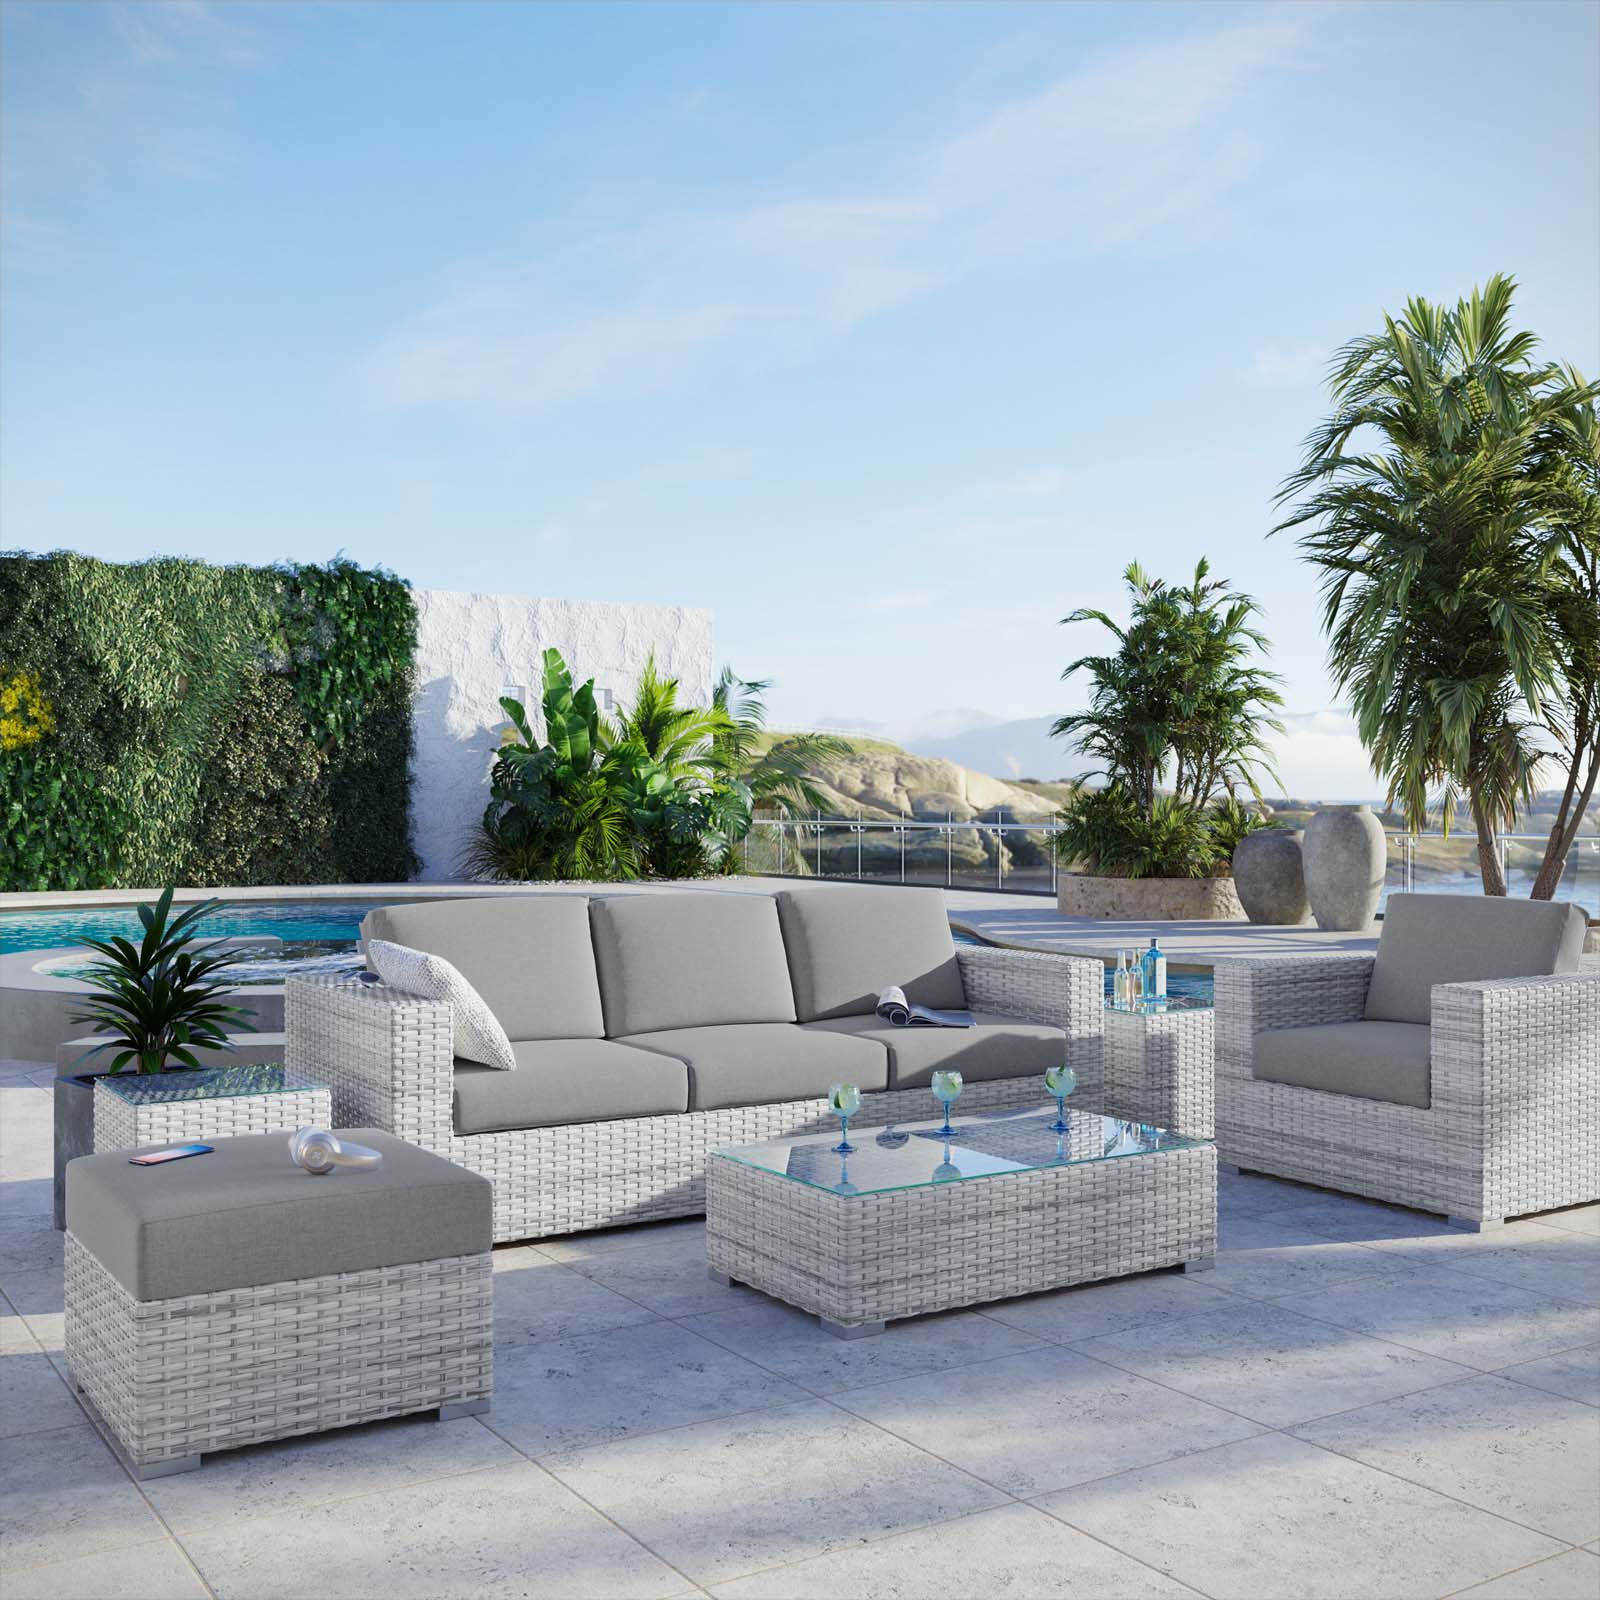 Lounge Sectional Sofa Chair Set, Rattan, Wicker, Grey Gray, Modern Contemporary Urban Design, Outdoor Patio Balcony Cafe Bistro Garden Furniture Hotel Hospitality - image 2 of 10